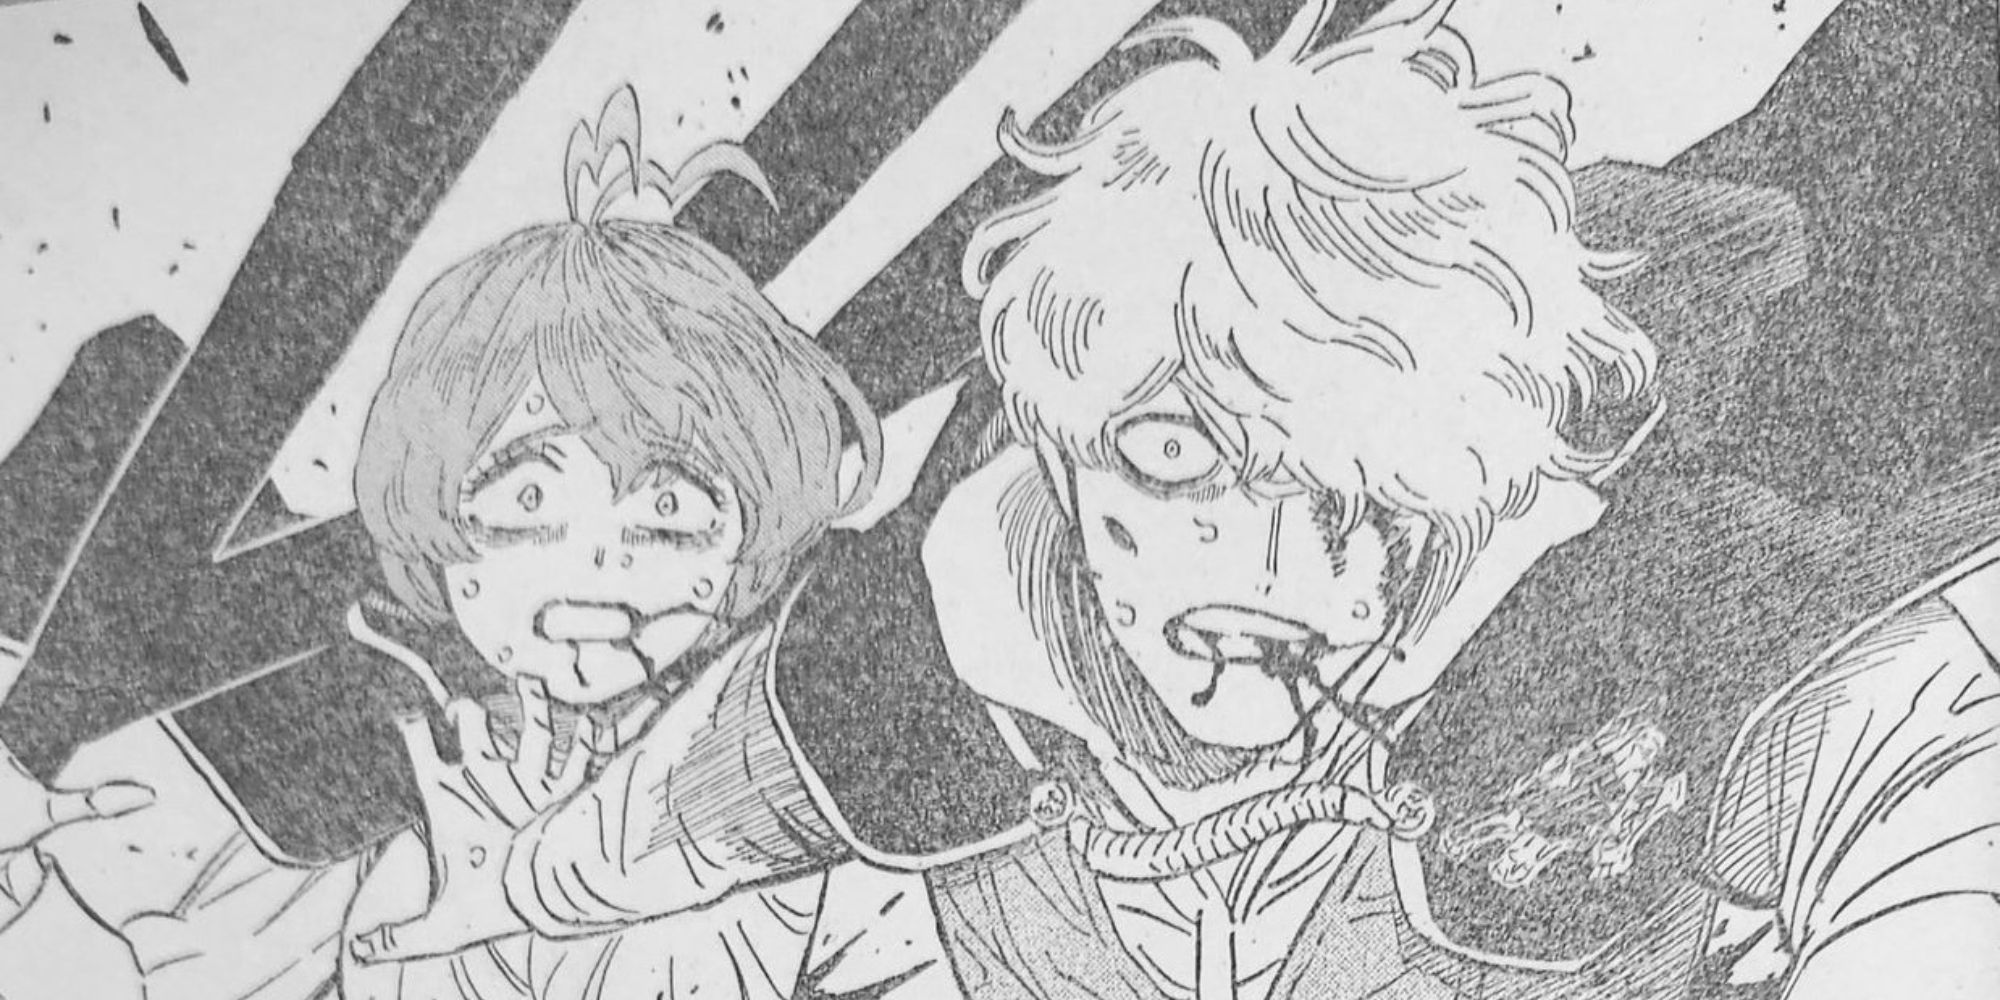 Black Clover Chapter 364 Spoilers Tease Secre’s Arrival To The Battlefield